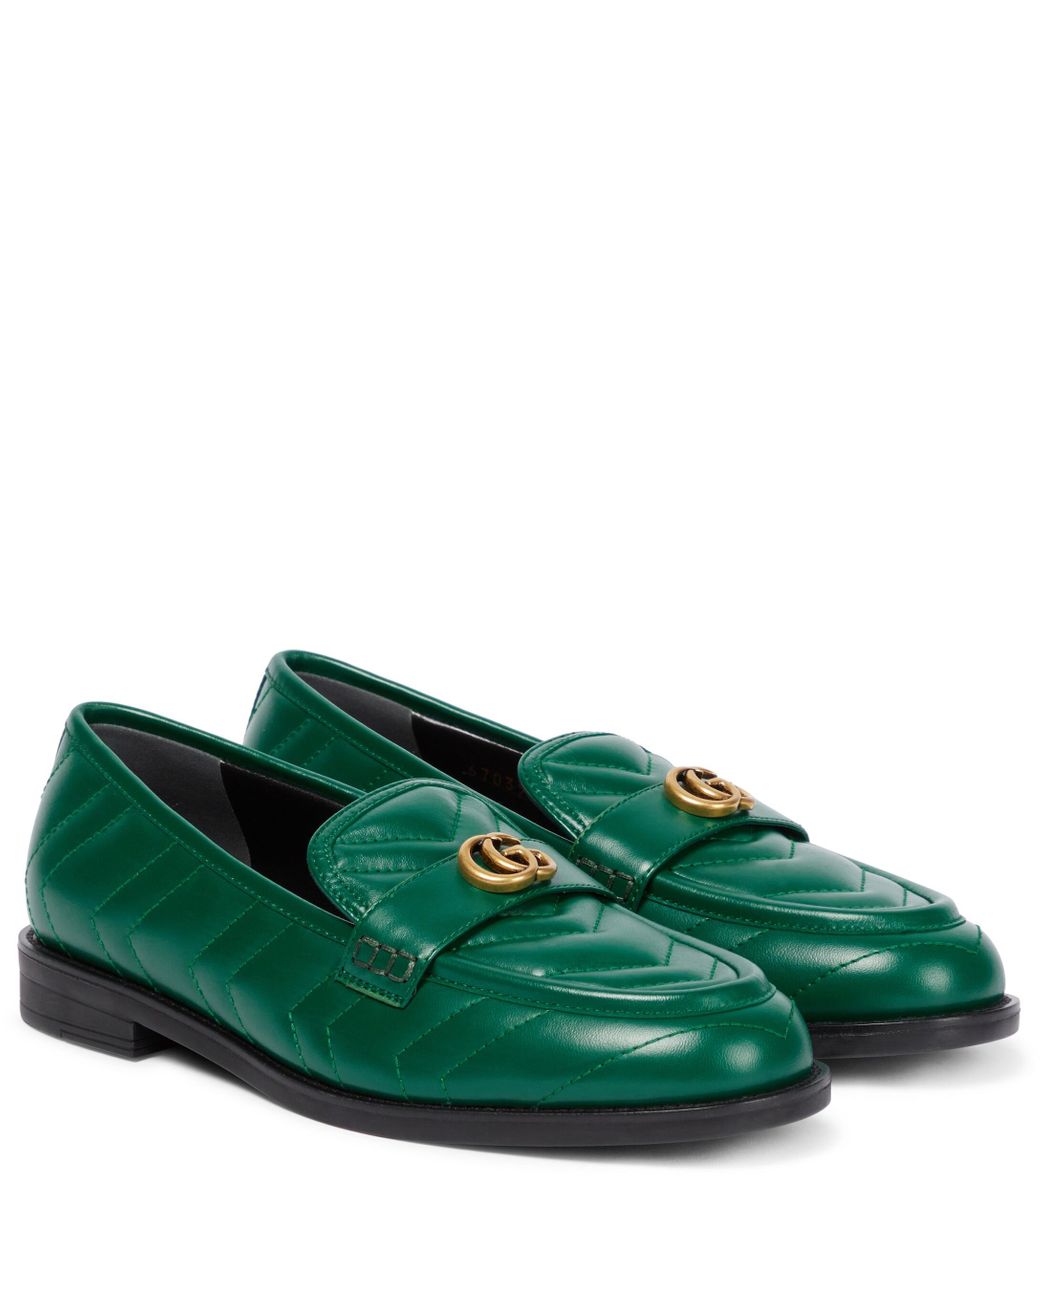 Gucci Double G Matelassé Leather Loafers in Green | Lyst